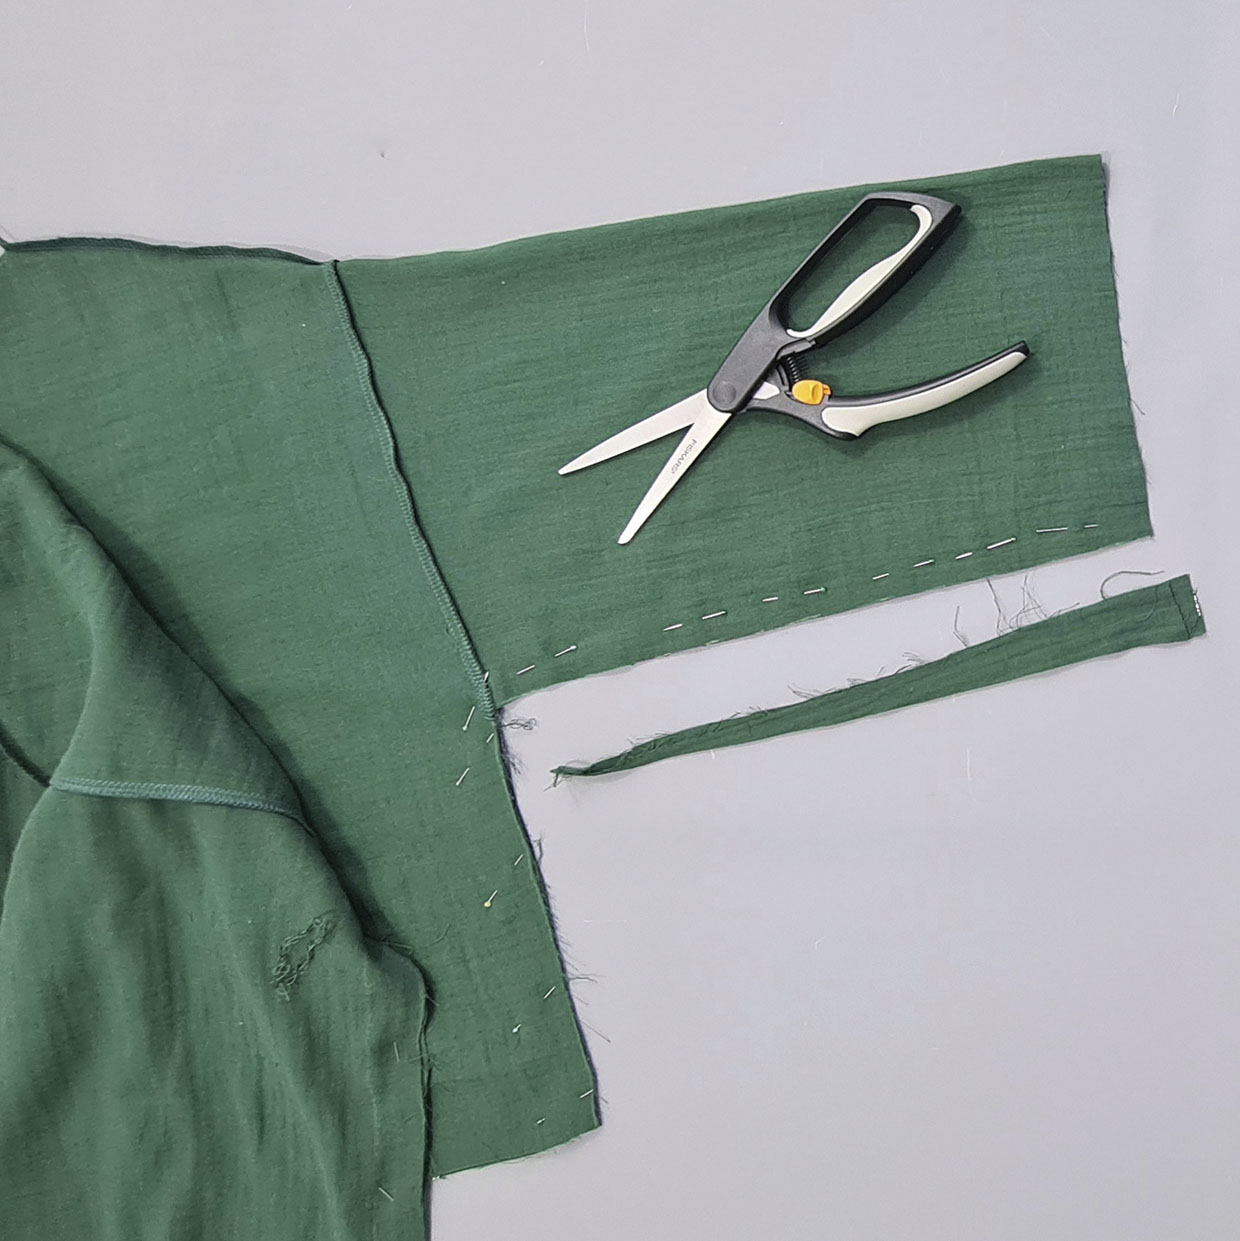 Step 5 – sew the sleeves in one pass